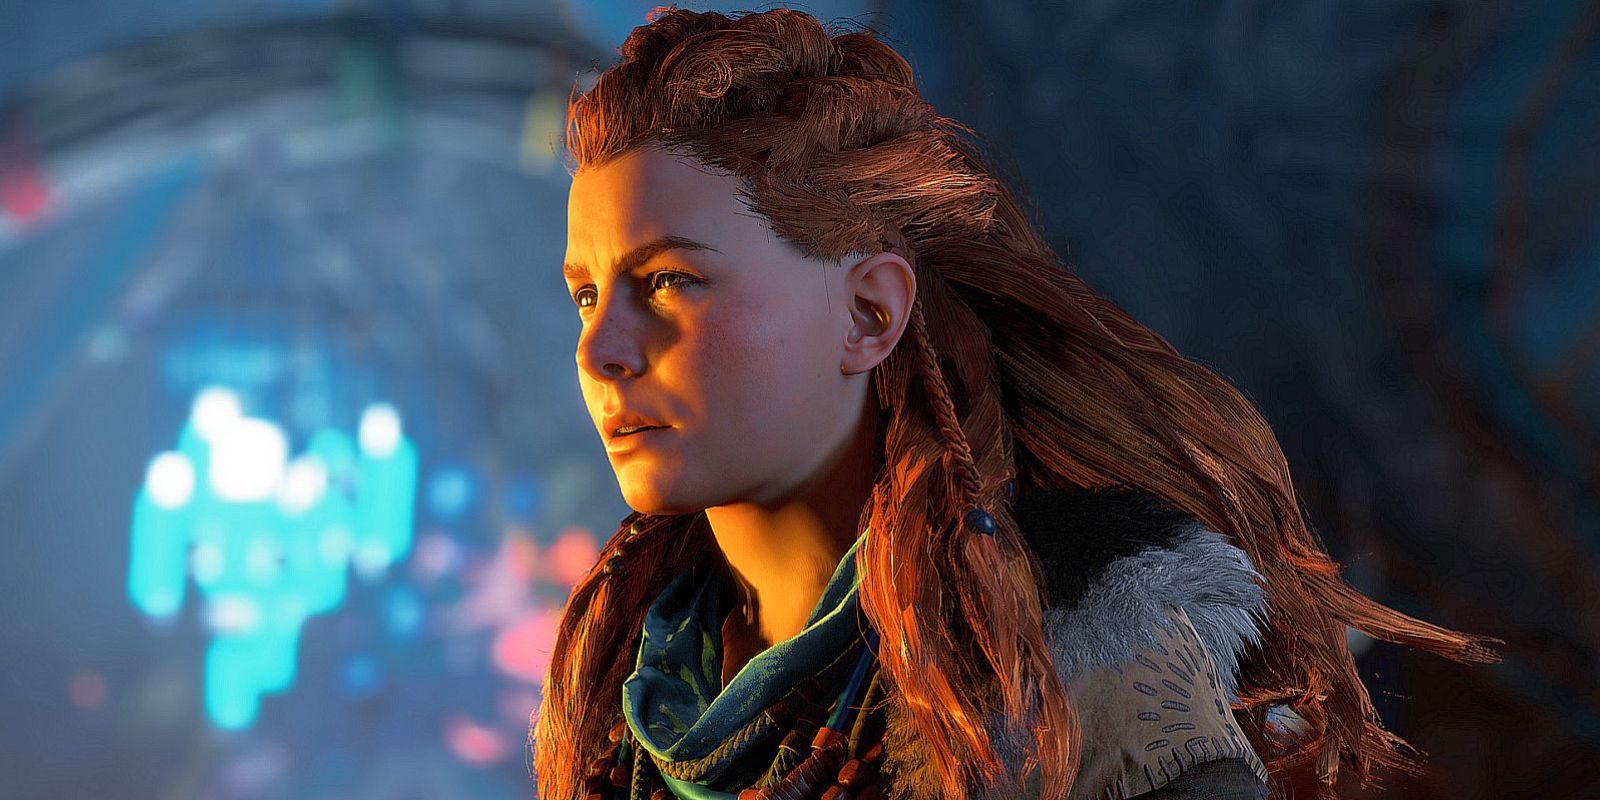 Aloy looks in the distance with light reflecting on her face in Horizon Zero Dawn.